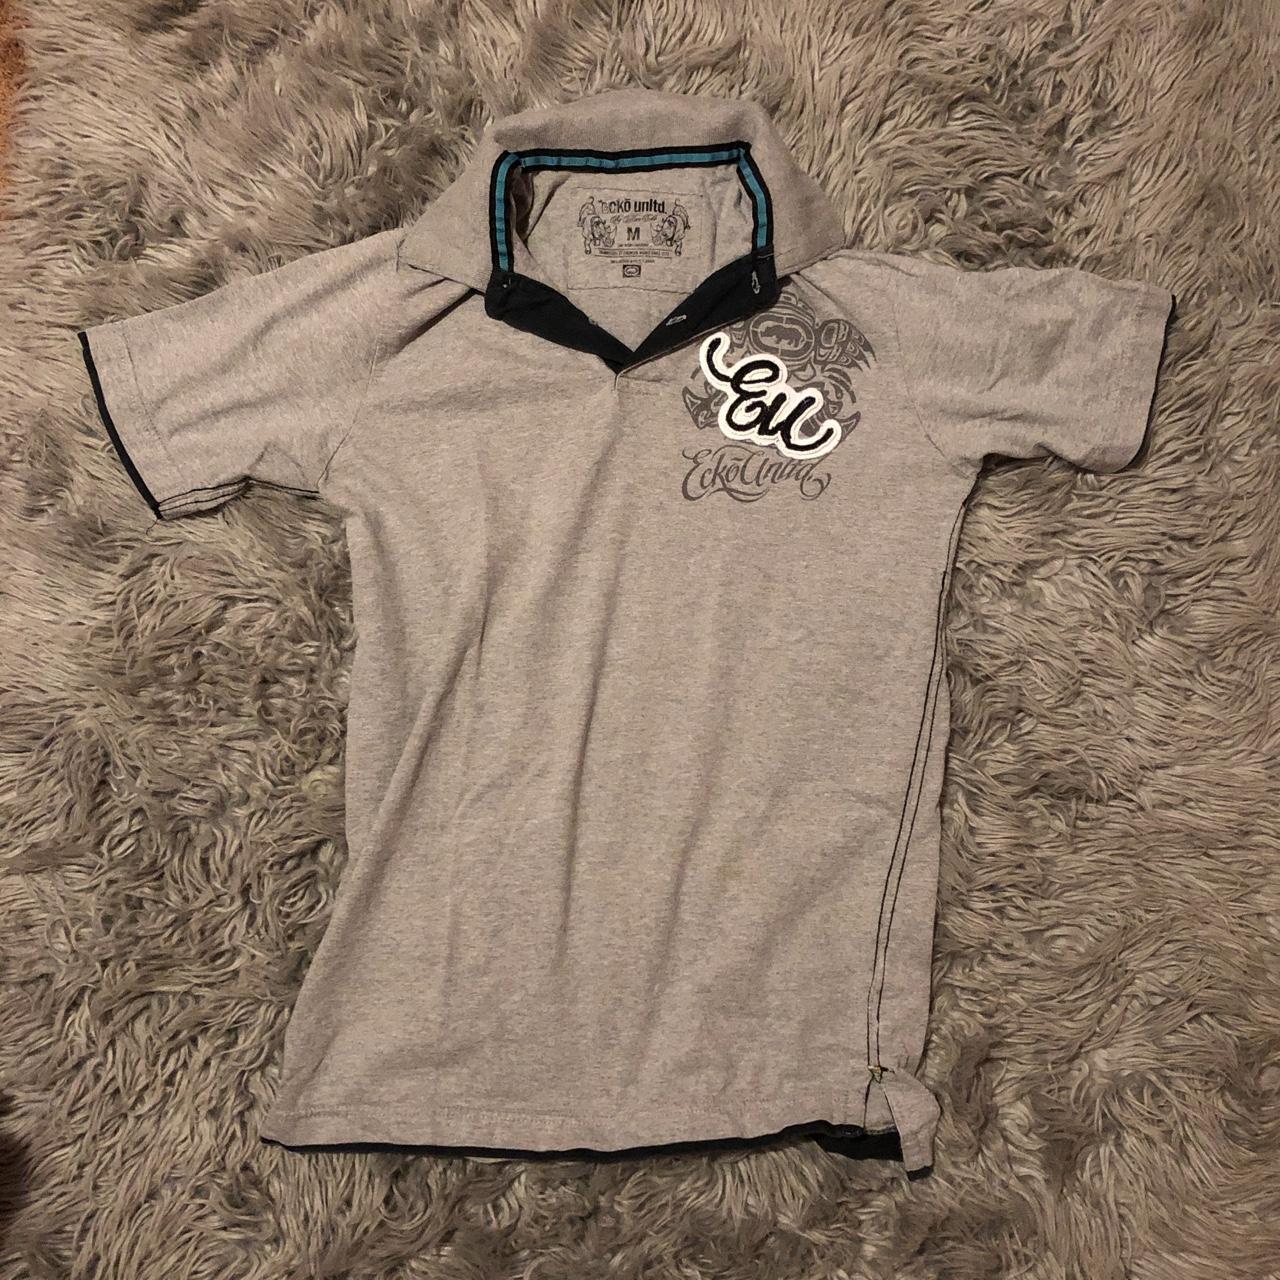 ecko polo rare embroidered logo on front size medium - Depop